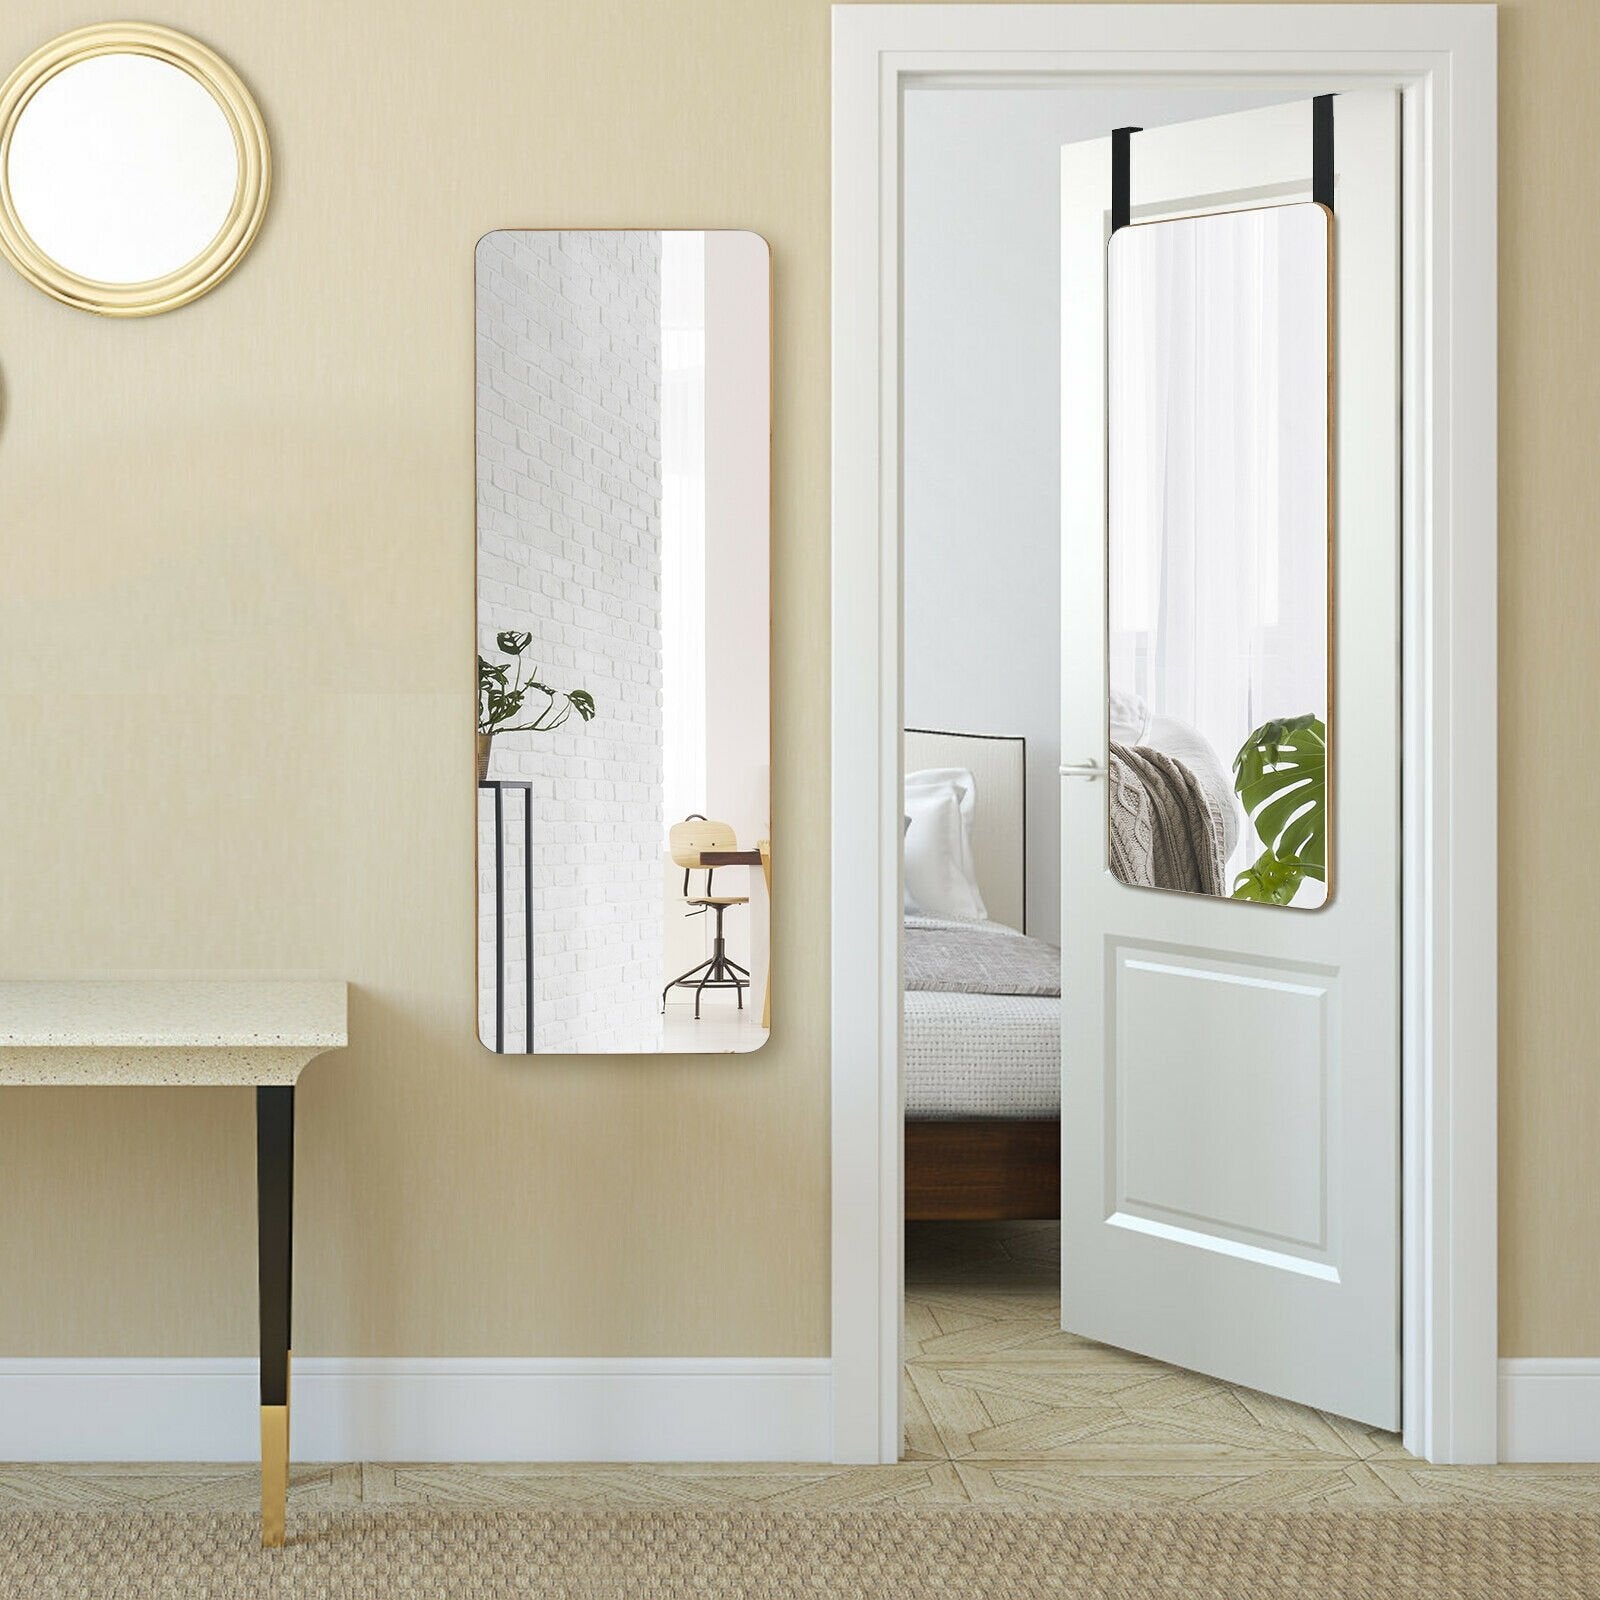 39.5 x 11 Inch Wall Mounted Over the Door Bamboo Frame Frameless Mirror, Golden - Gallery Canada